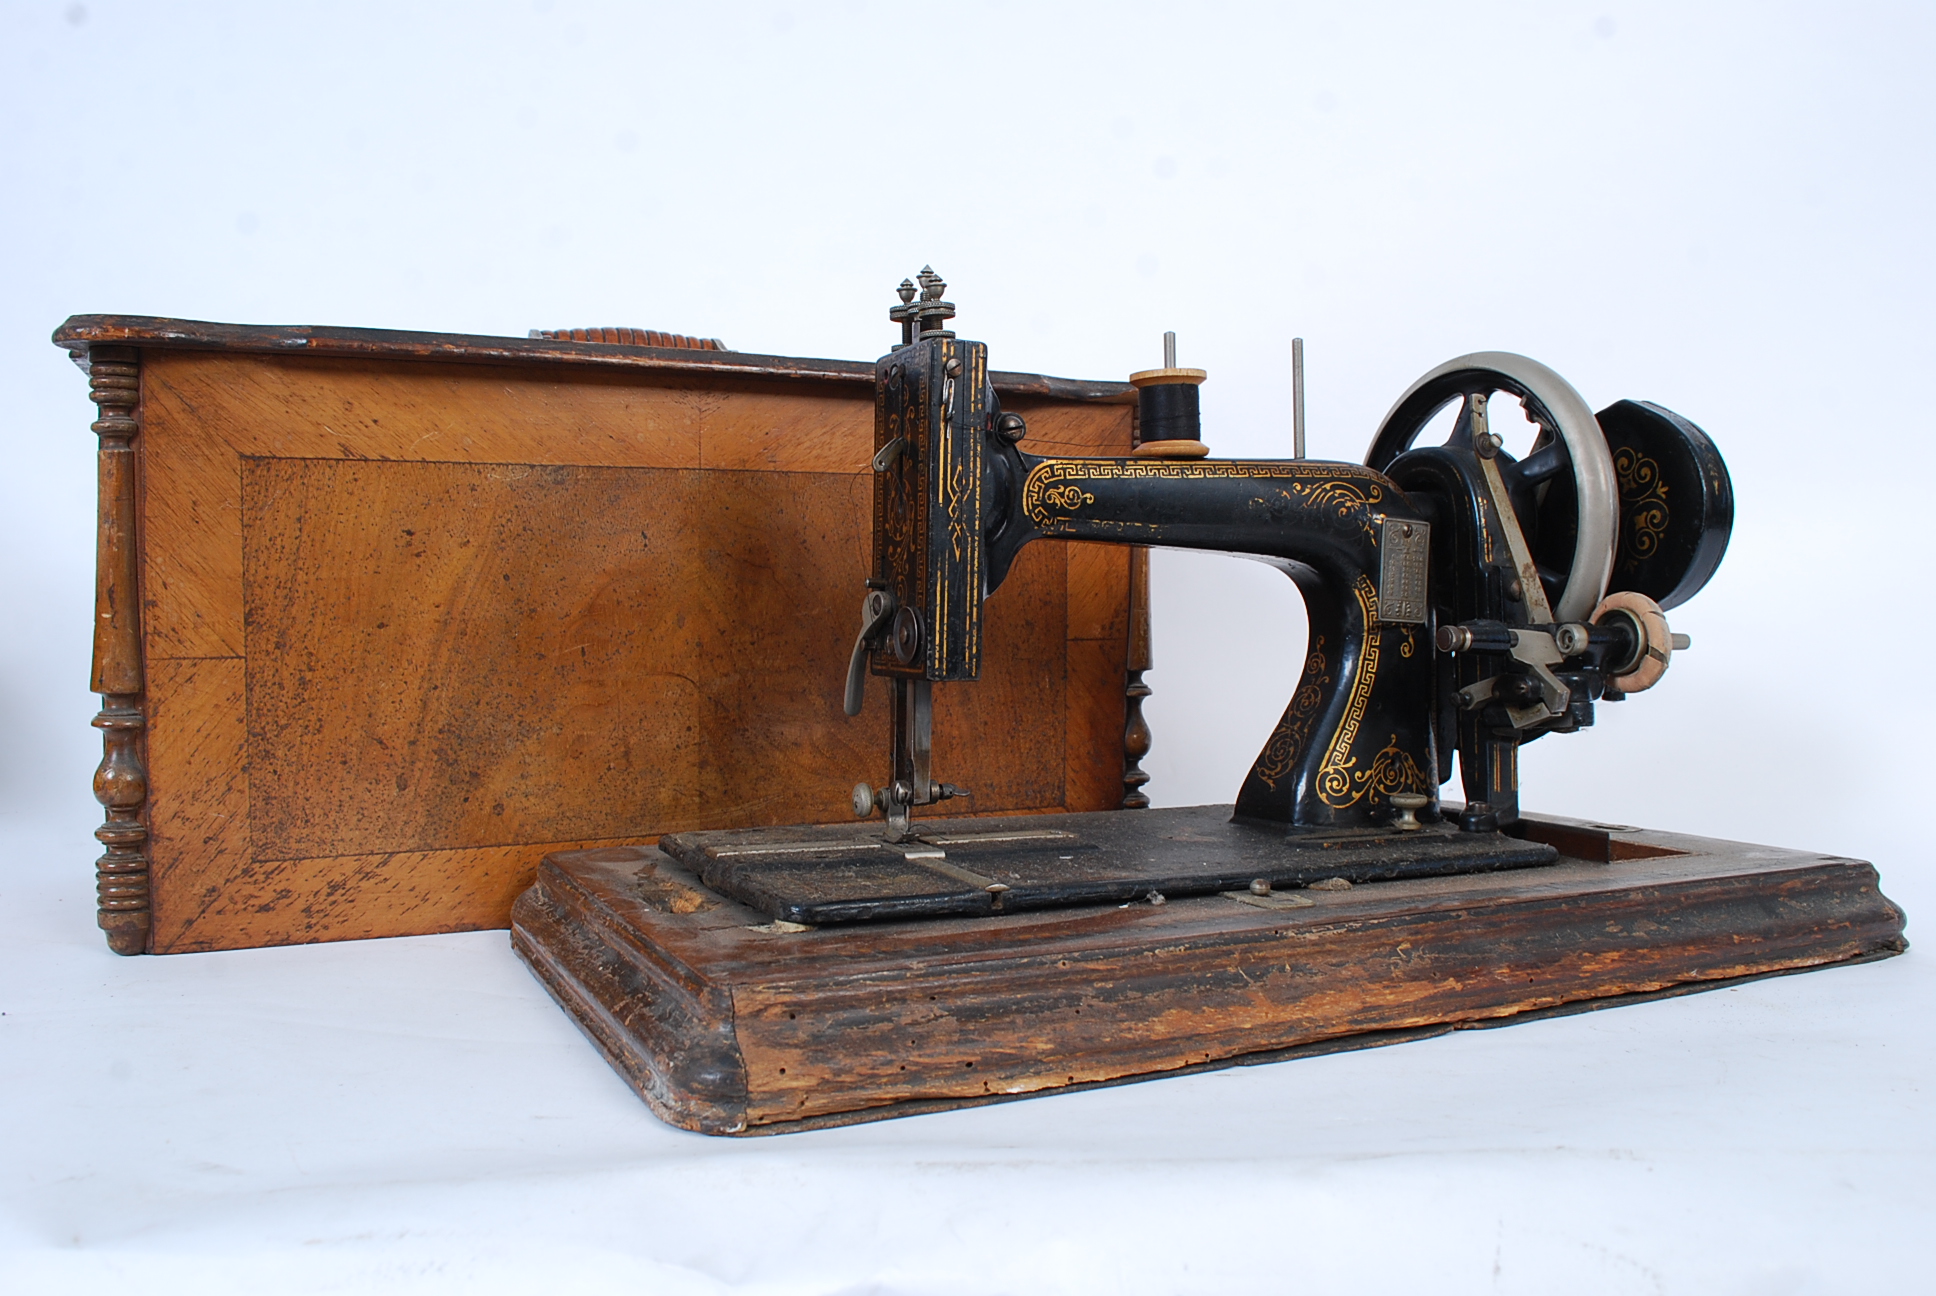 A vintage sewing machine from the 19th century. 